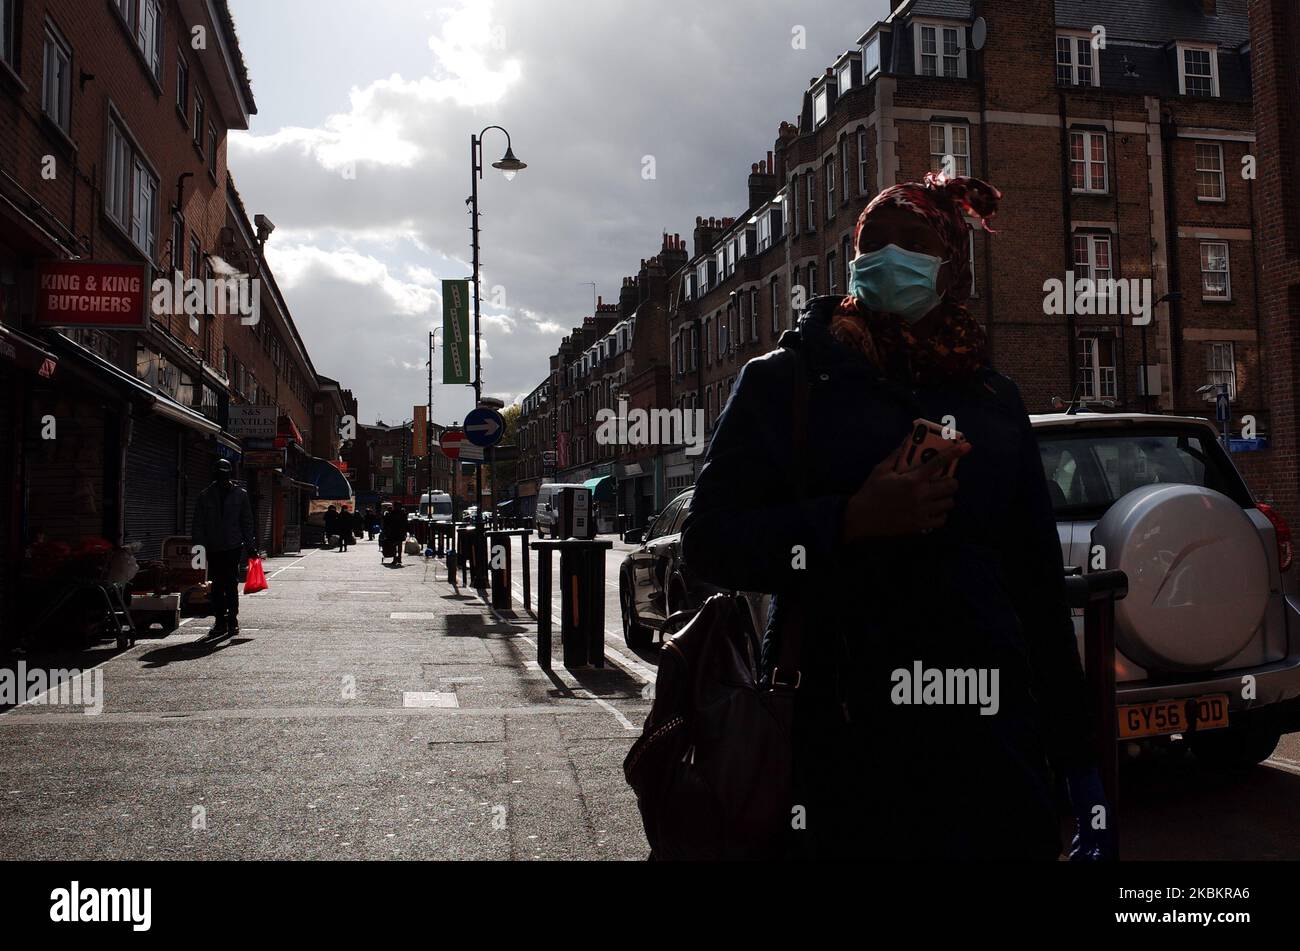 A woman wearing a mask walks along East Street in the borough of Southwark, which has among the highest number of covid-19 coronavirus cases anywhere in the UK, in London, England, on March 30, 2020. Official figures report that Southwark currently has 368 cases of covid-19, the highest in London and fifth highest in the UK as a whole, behind Sheffield (428), Glasgow (449), Hampshire (498) and Birmingham (578). The neighbouring London borough of Lambeth is similarly hard-hit, with 366 cases, sixth-highest in the UK. Britain meanwhile began its second week of lockdown today, with the measures s Stock Photo